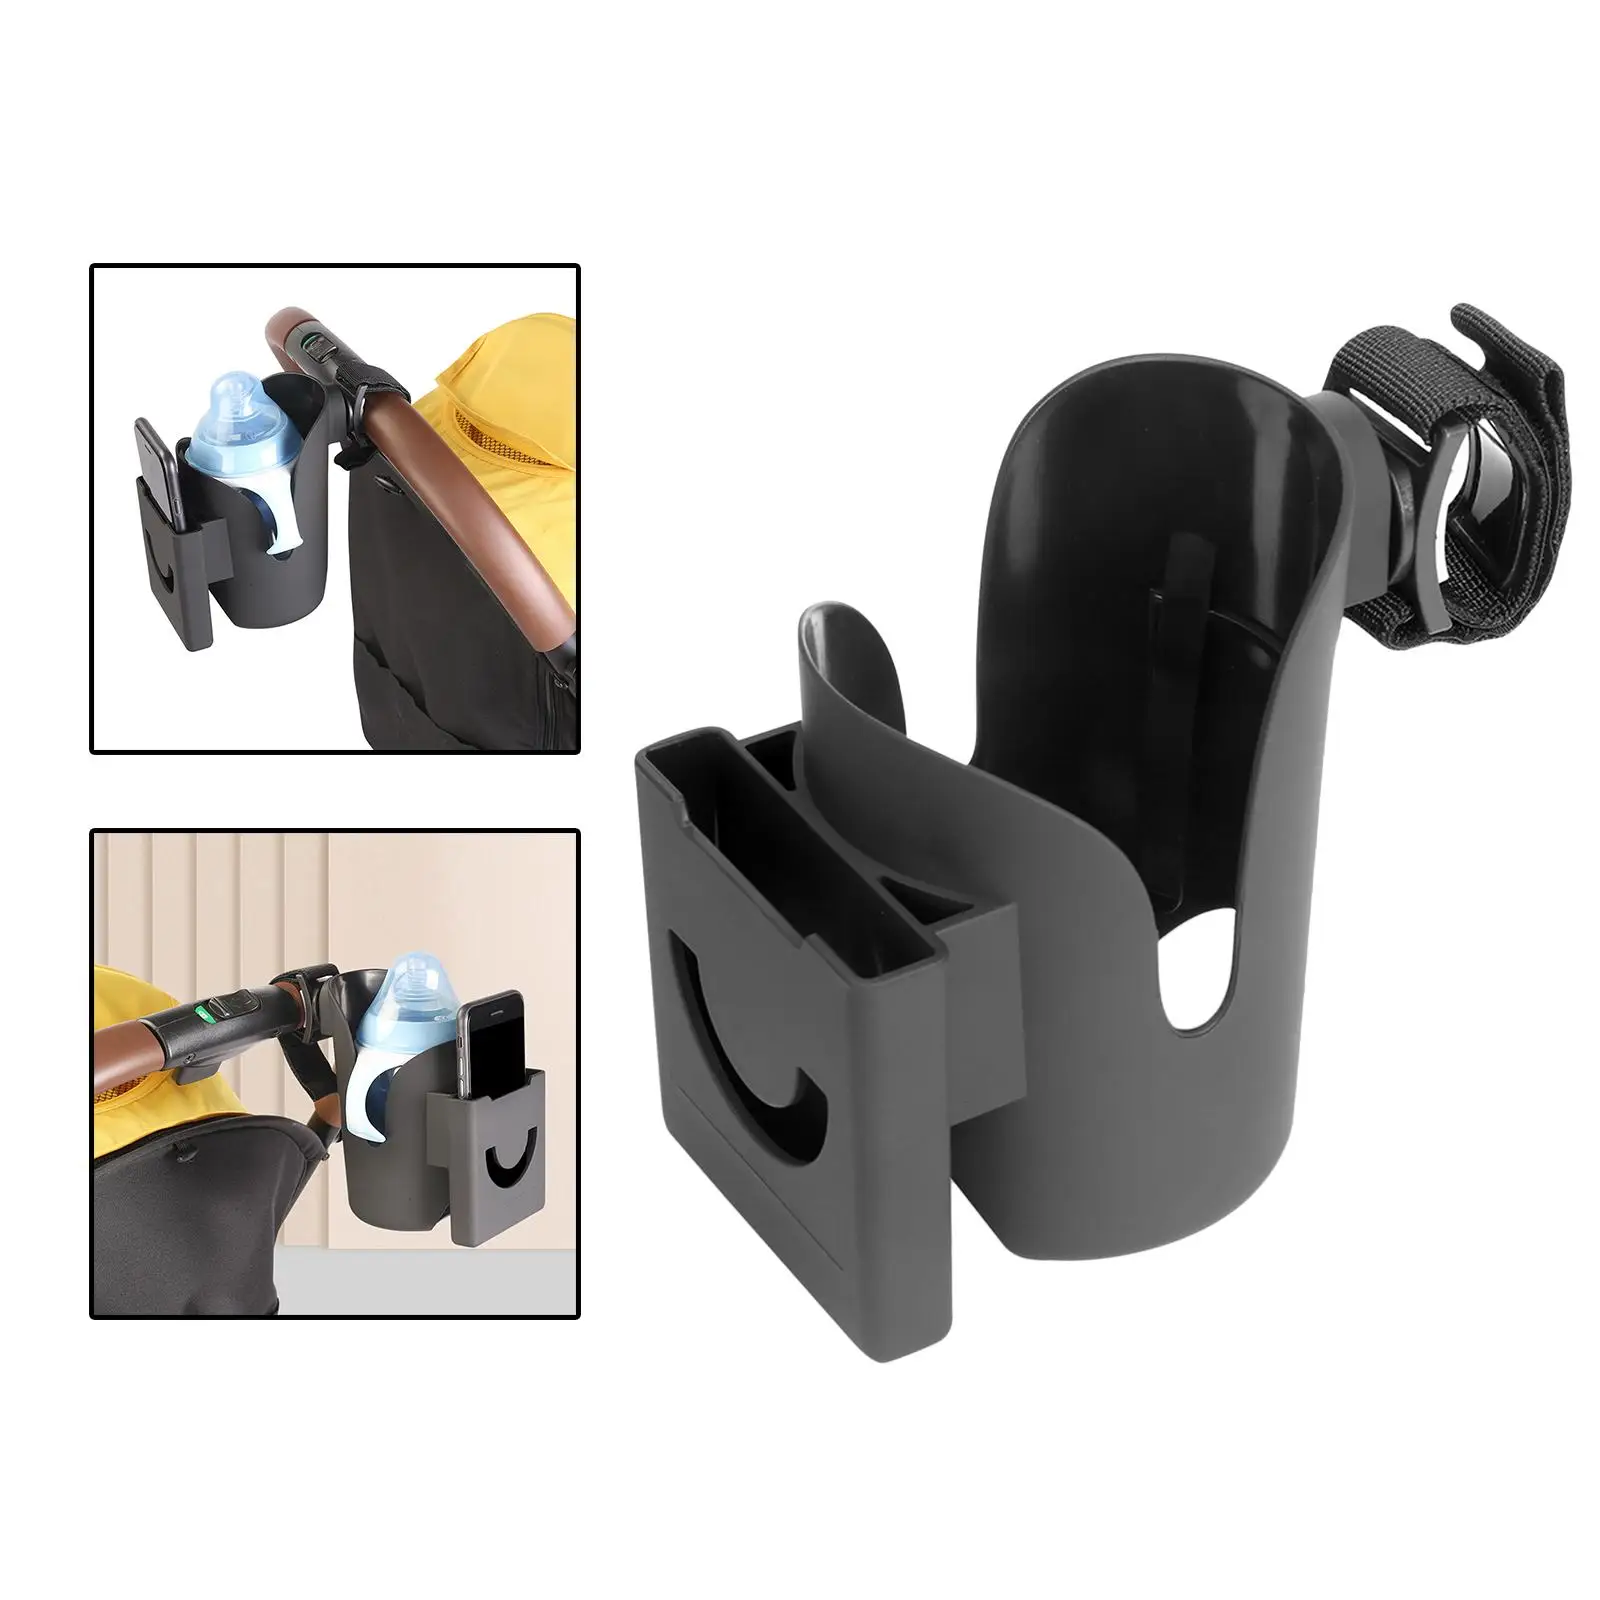 Stroller Cup Holder with Phone Holder Universal Attachment Large Caliber Organizer for Bike Scooter Treadmill Accessories